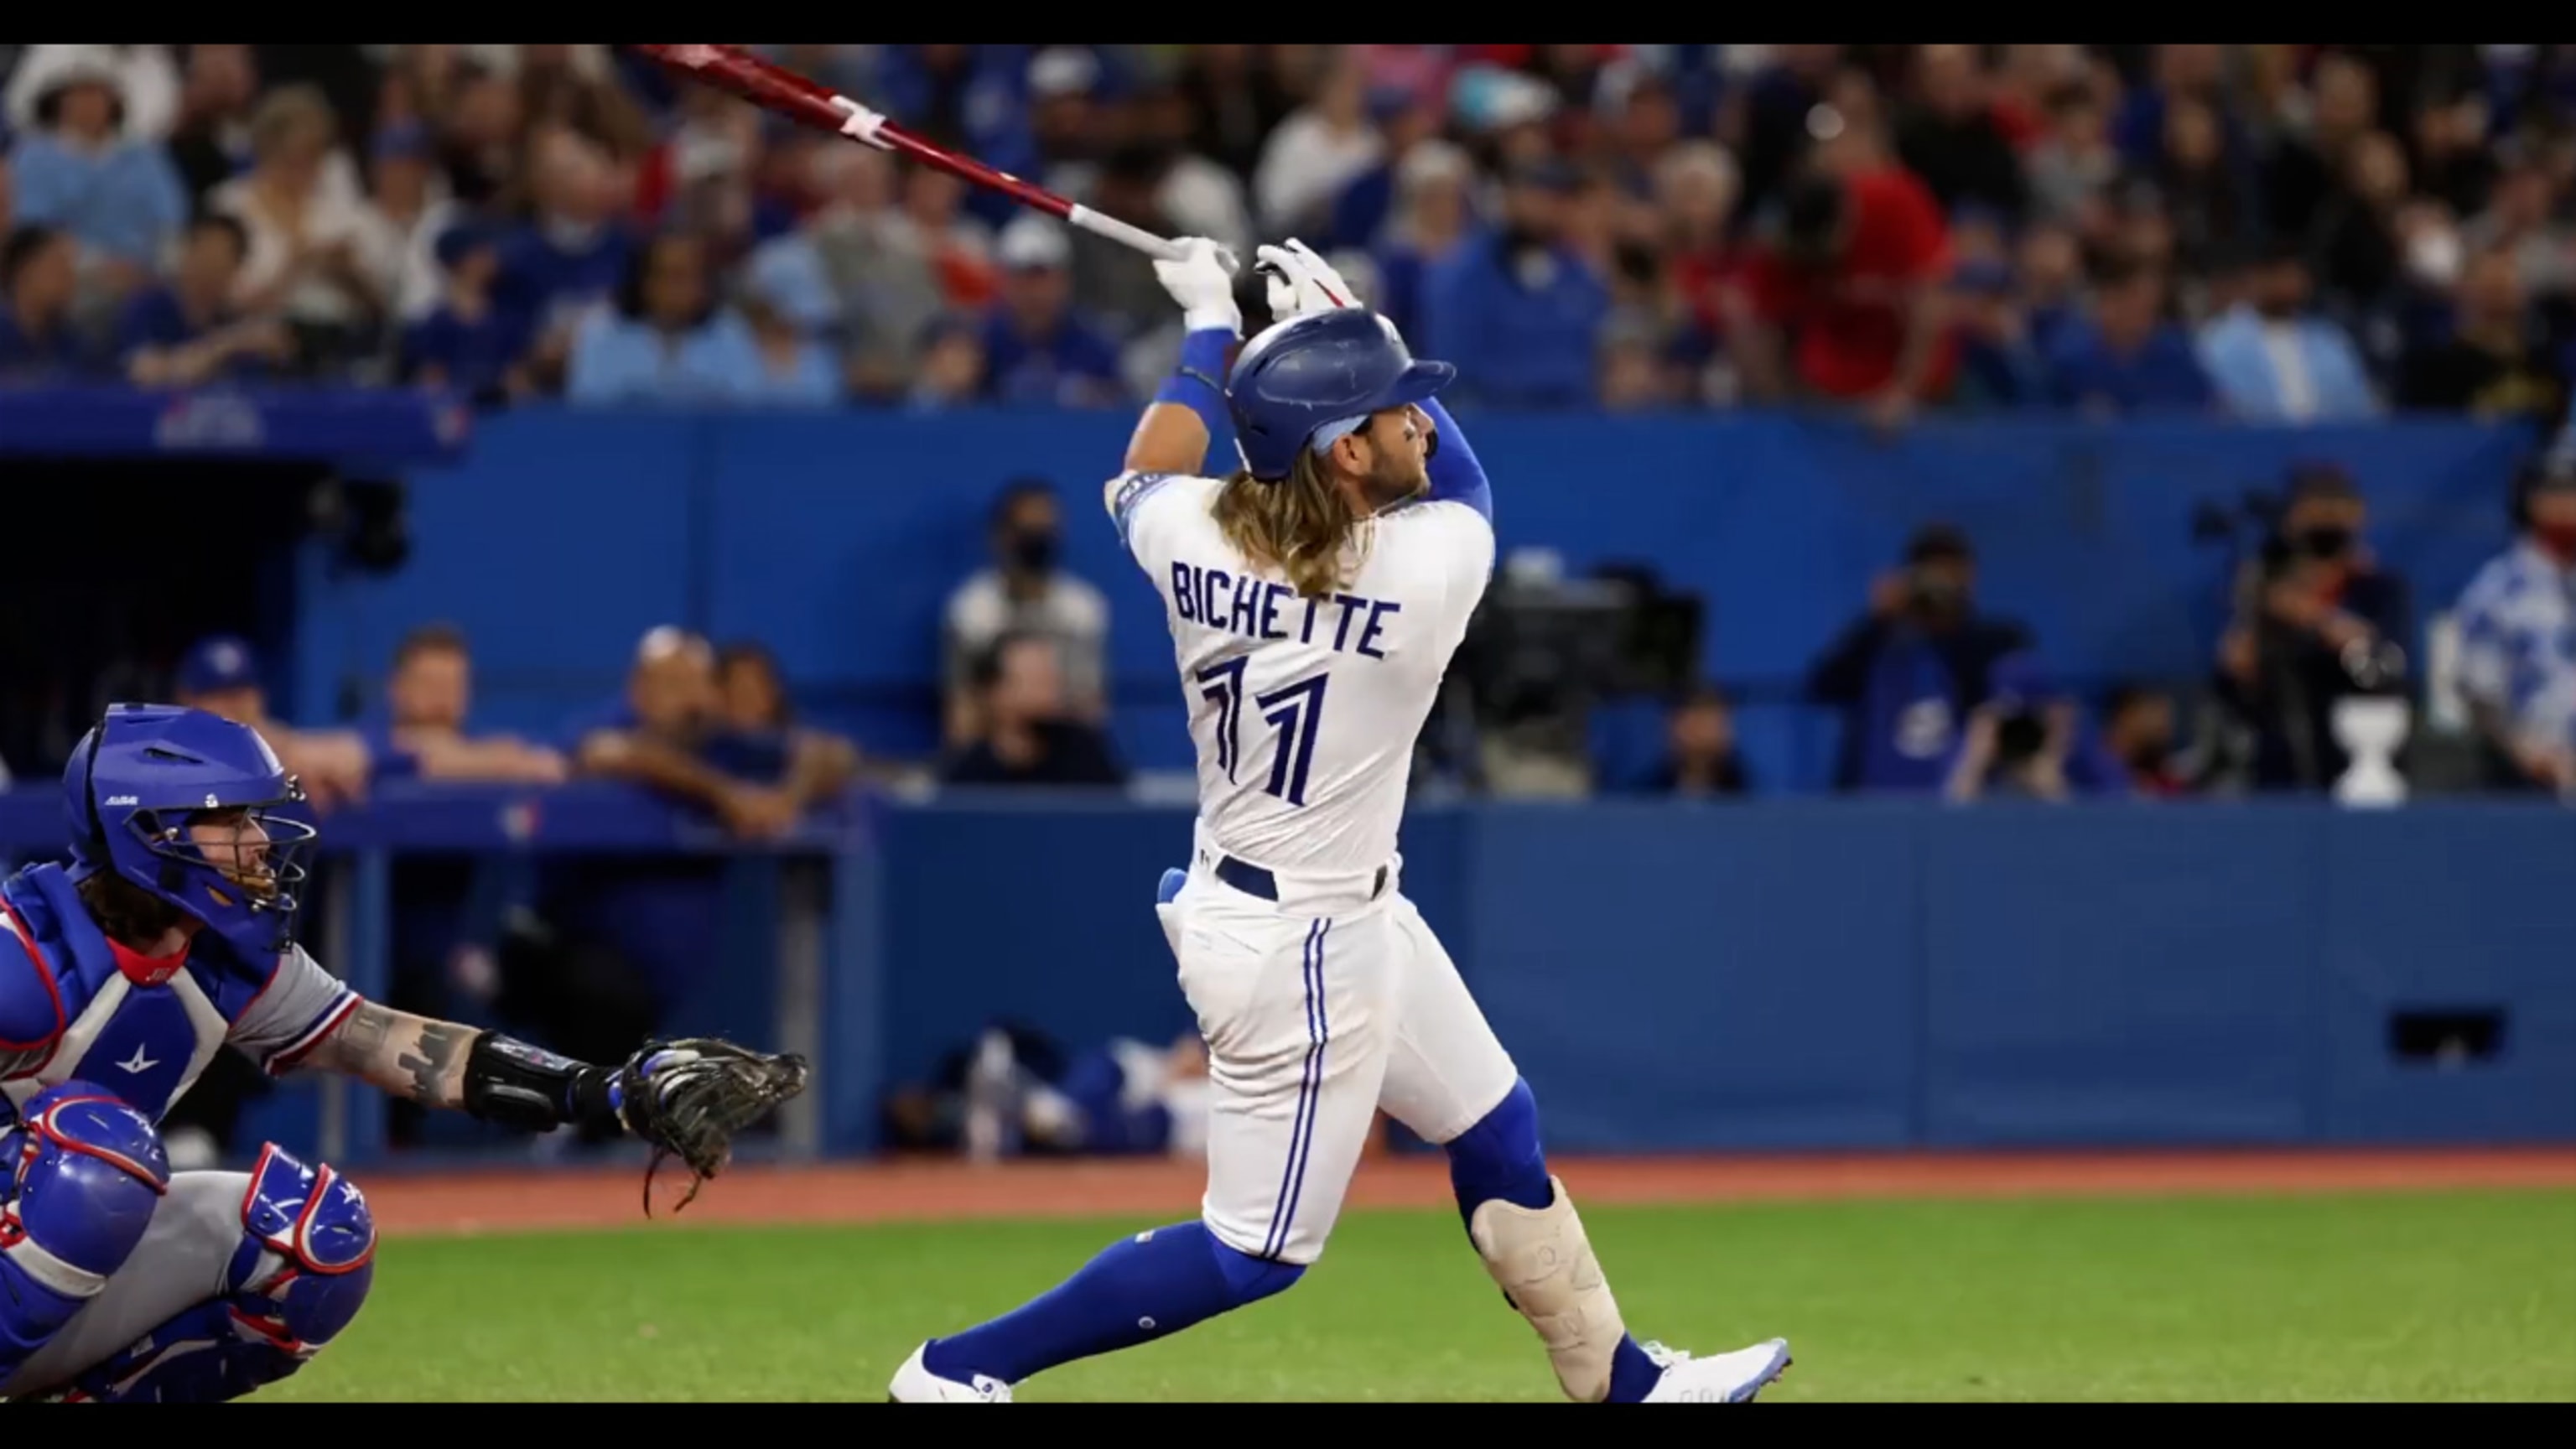 Blue Jay Bo Bichette cool with shift on field and in dugout